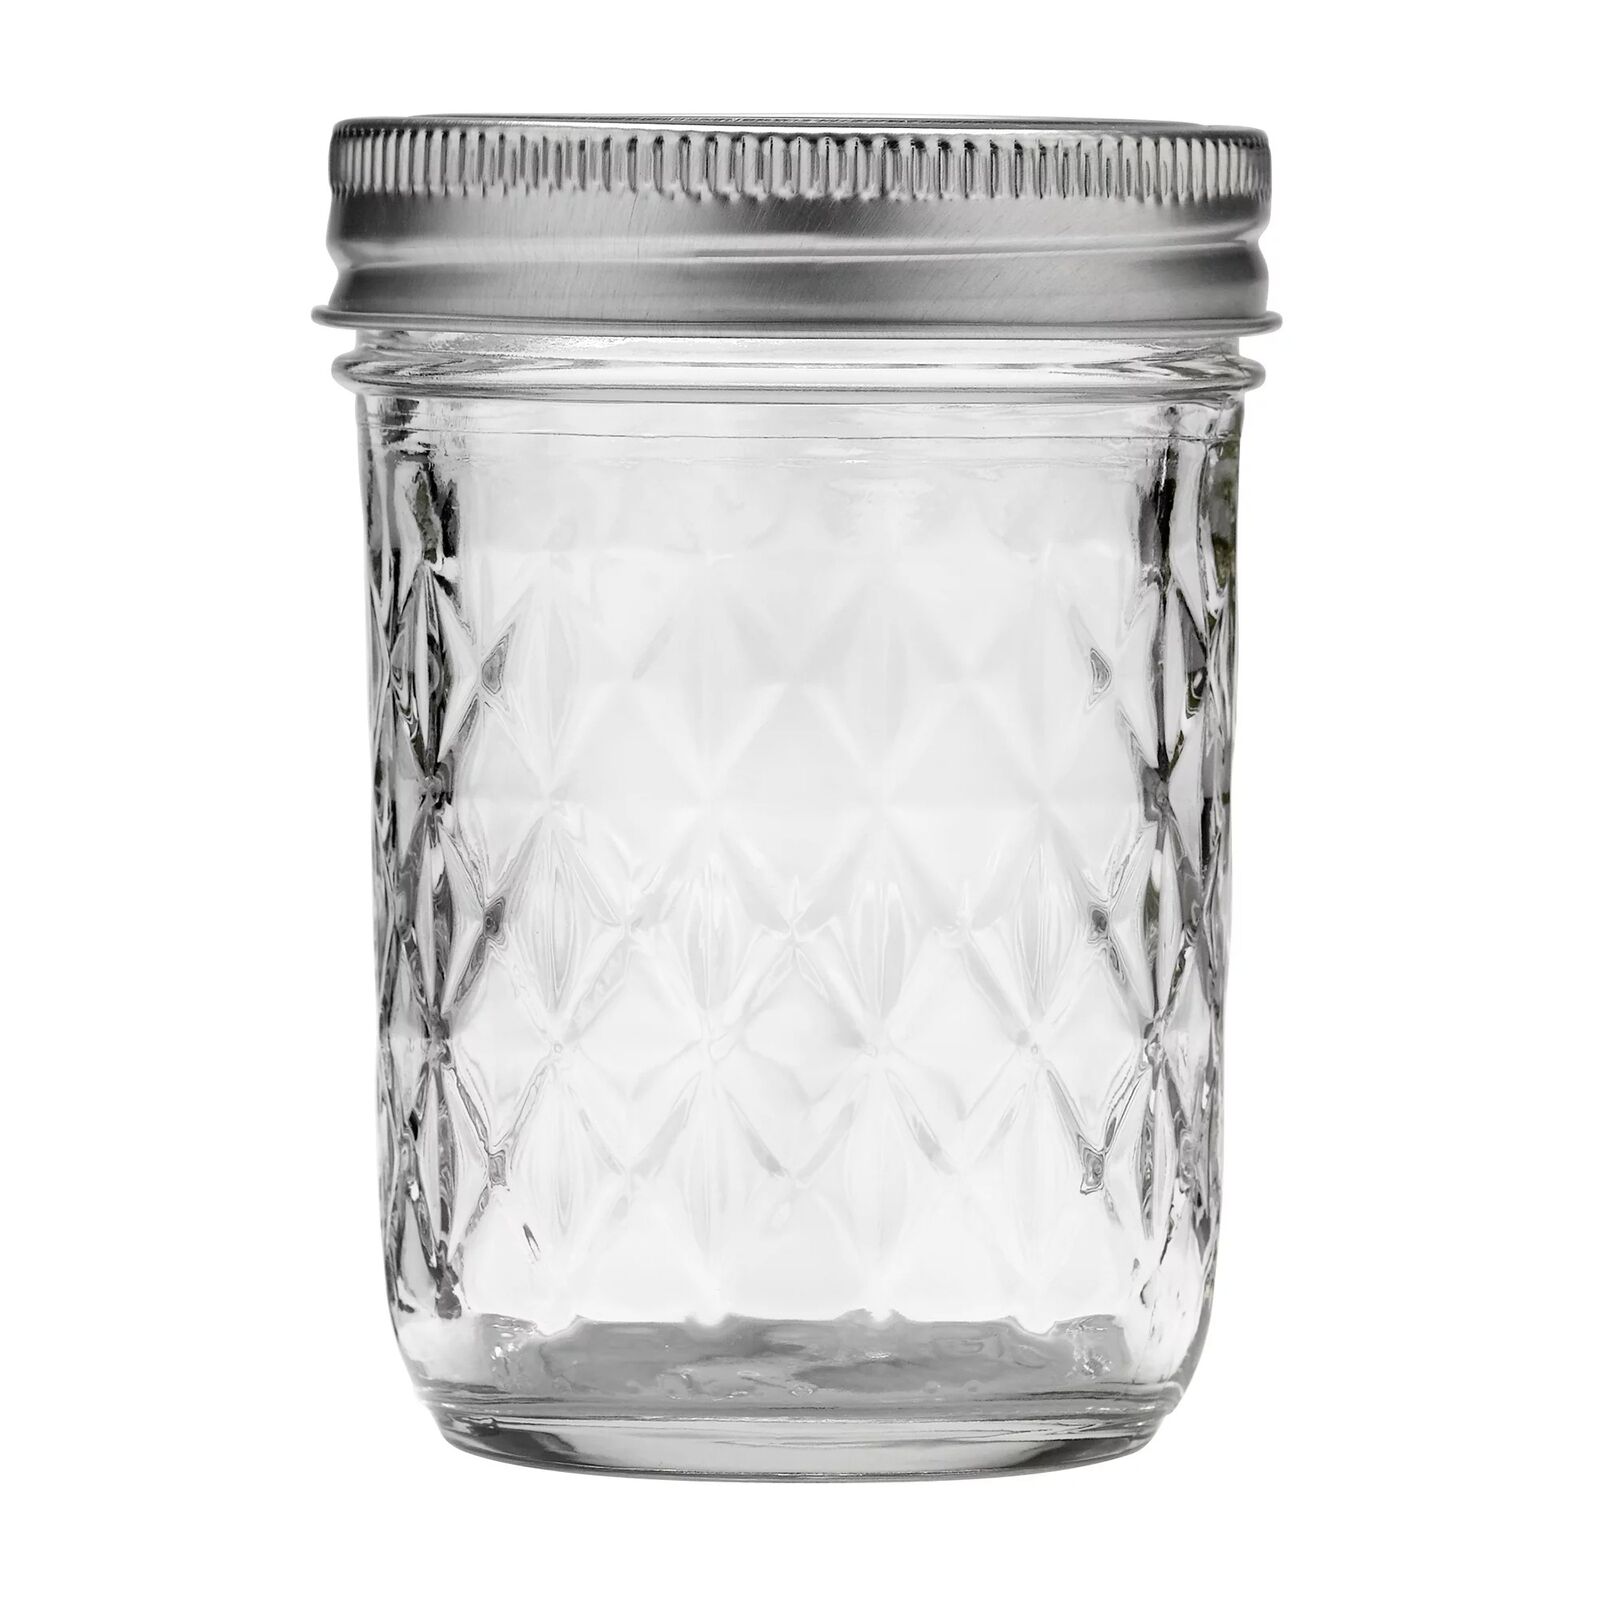 Quilted Crystal Mason Jar Regular Mouth, 8 Ounces, 12 Count, 4 Lb